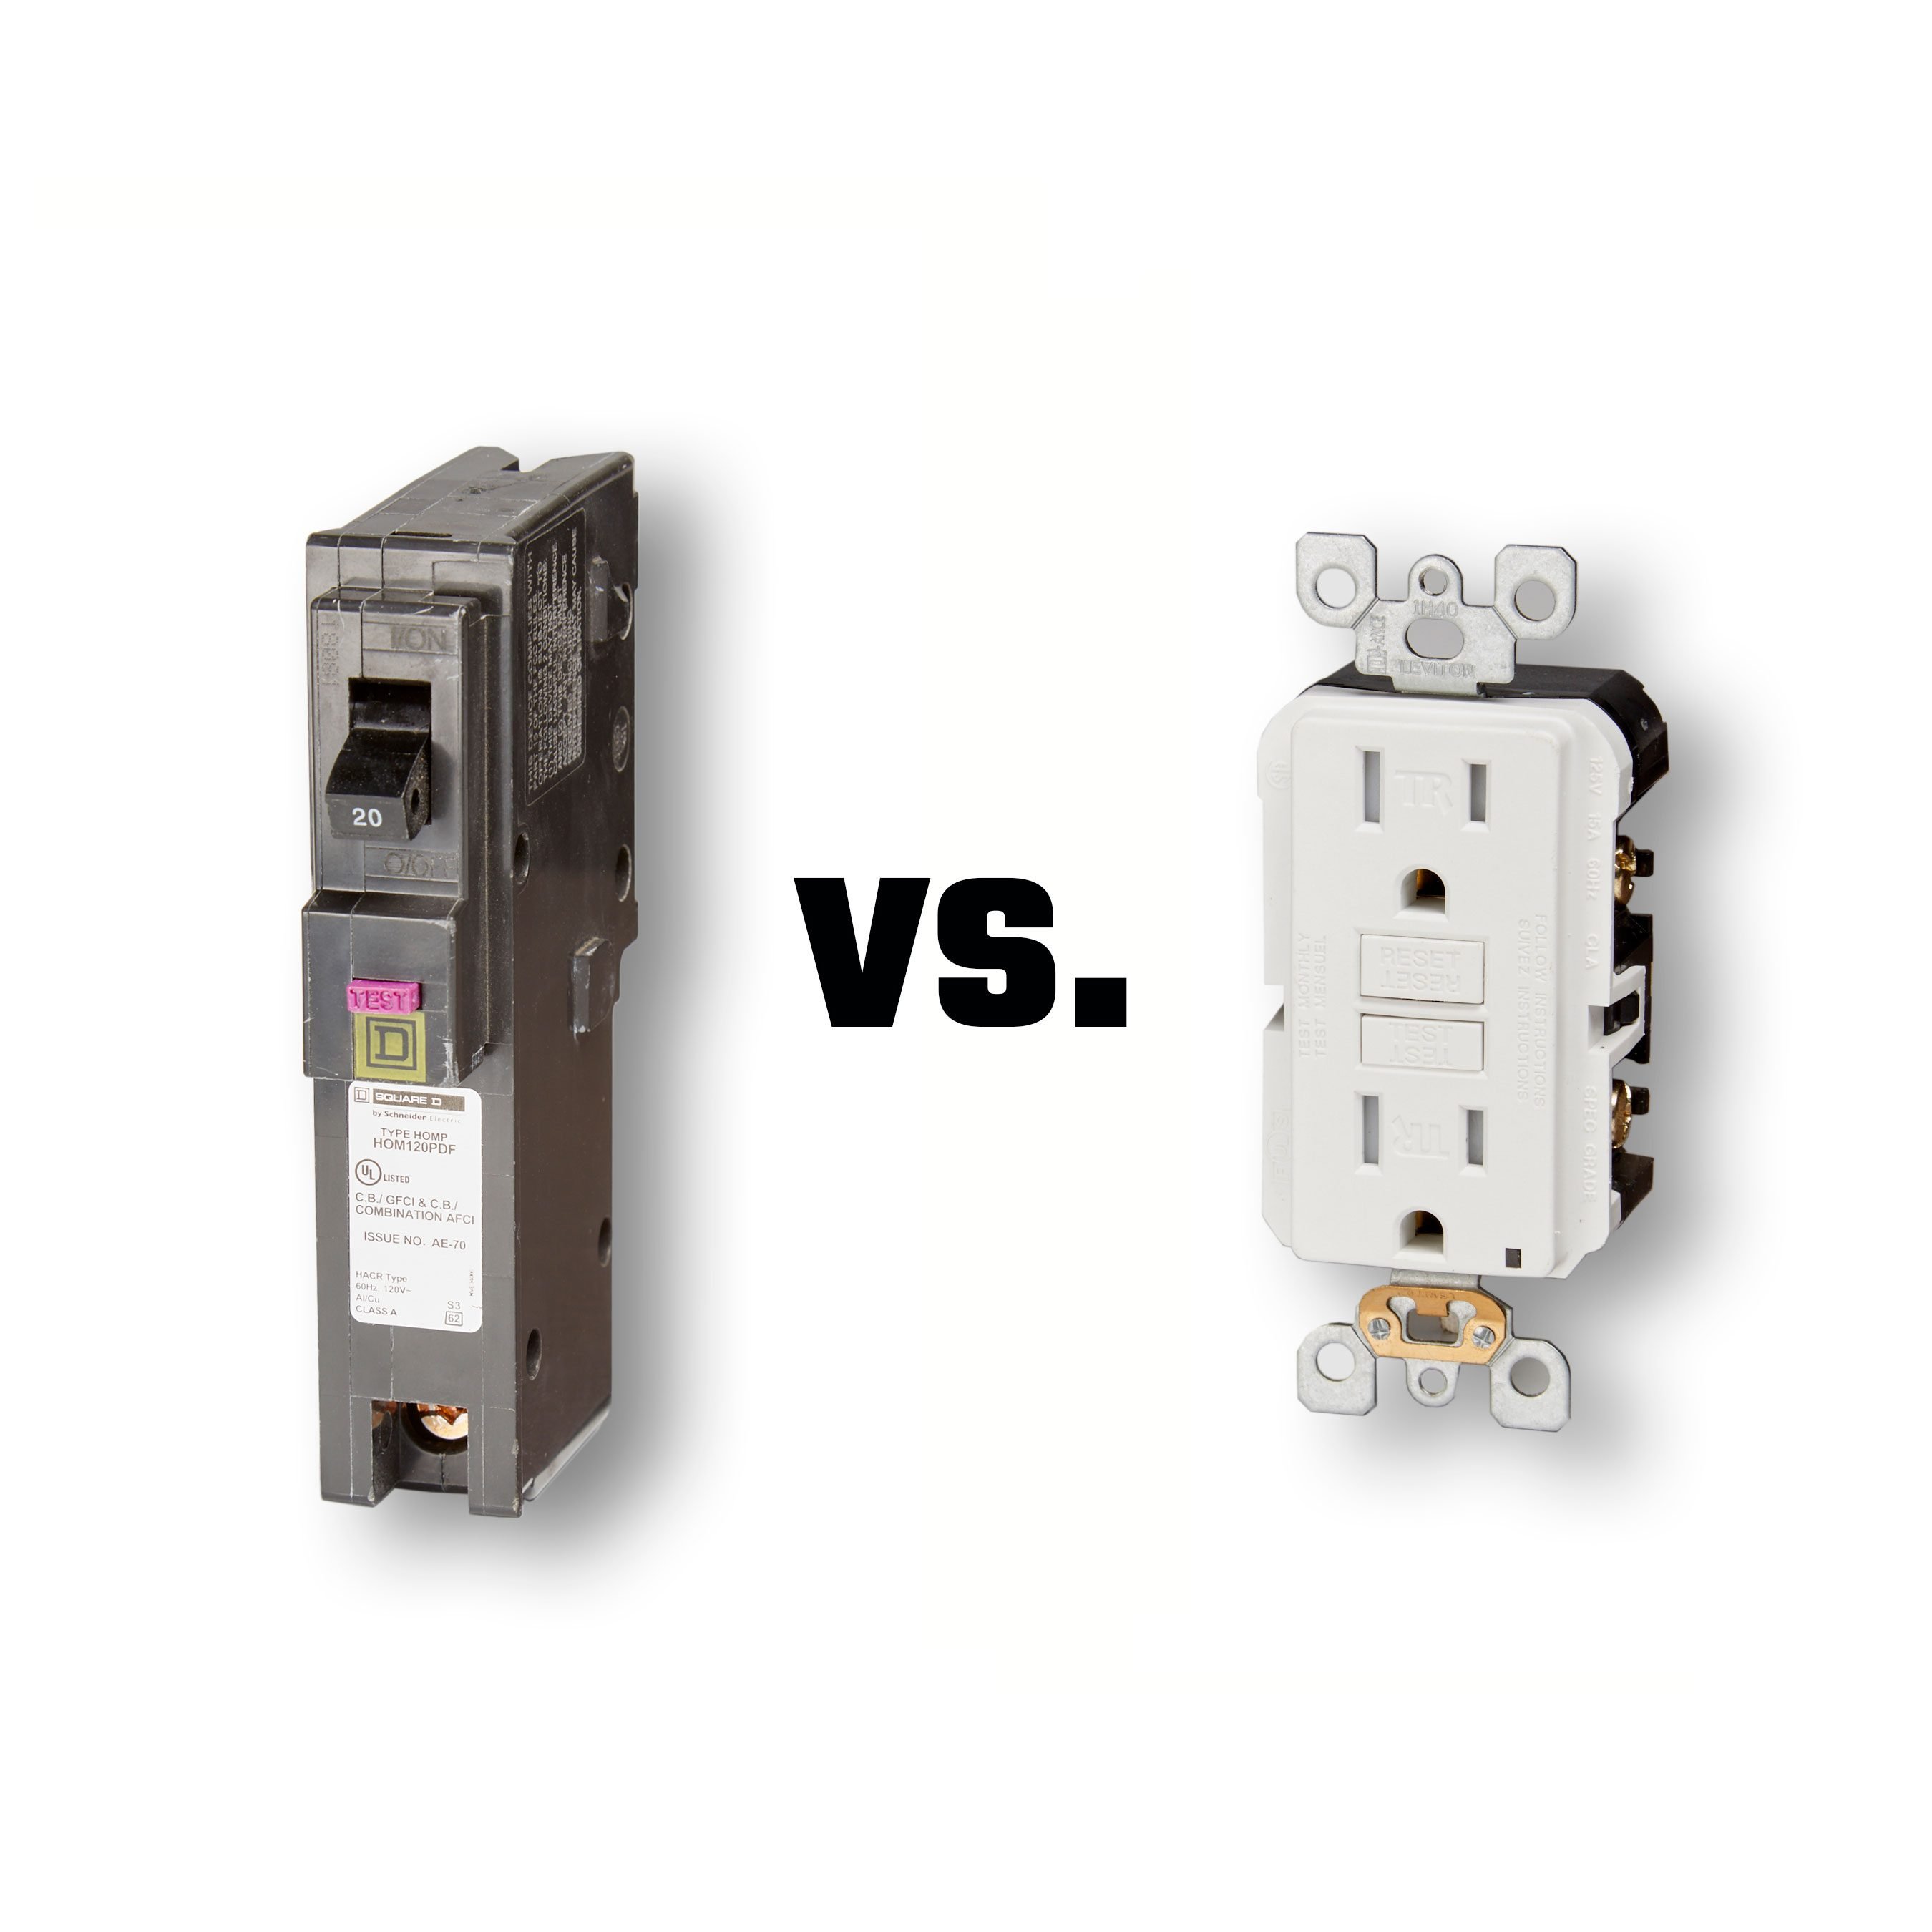 Should GFCI Protection Go in the Panel or the Receptacle?